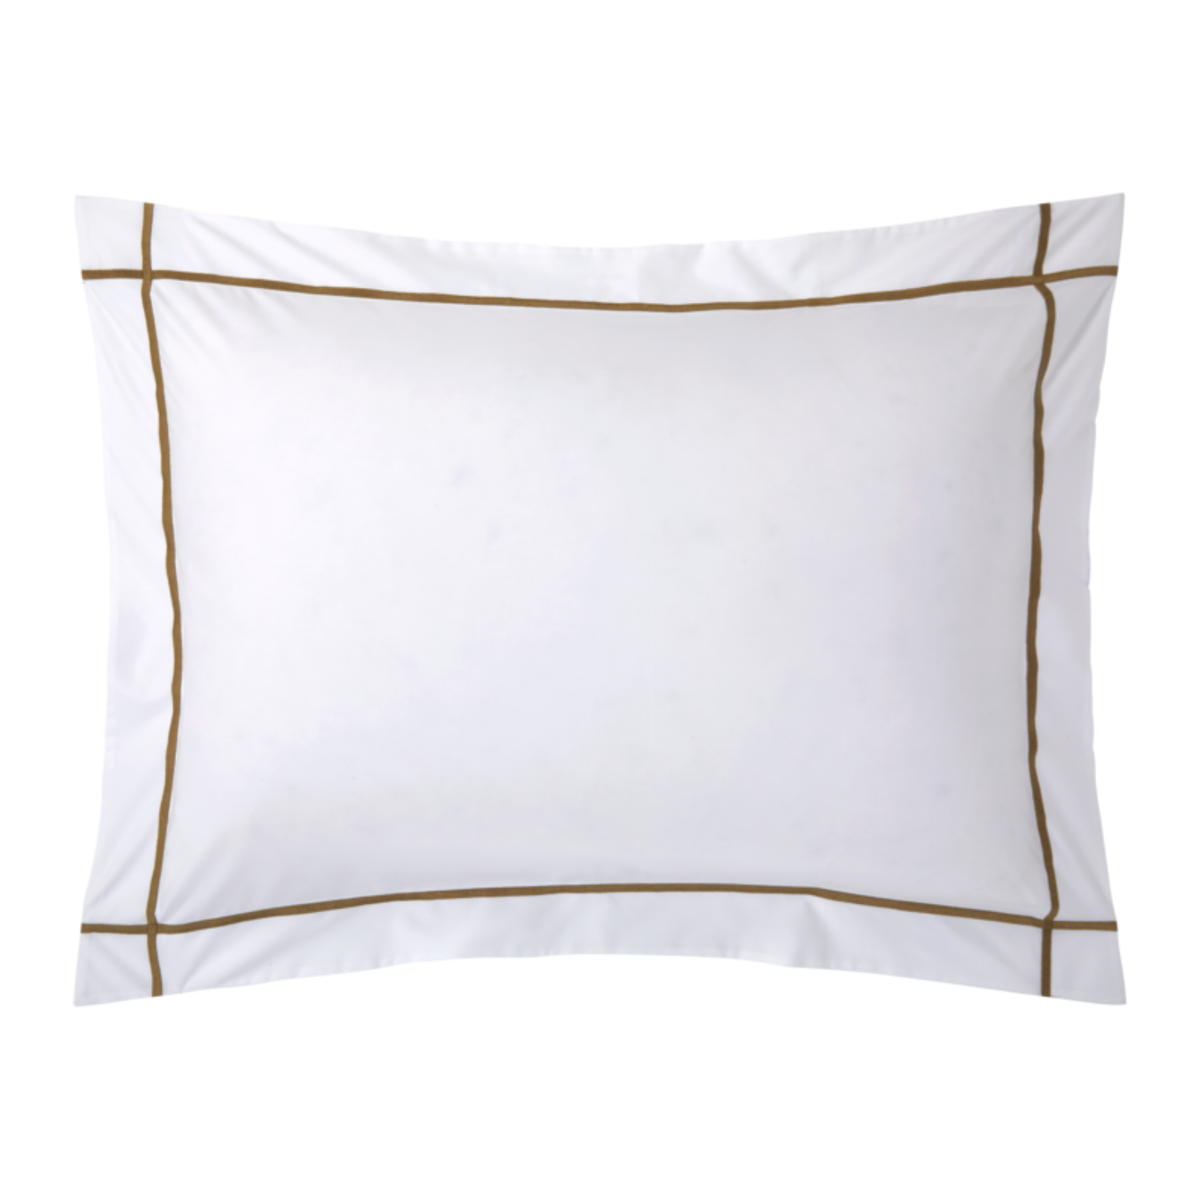 Sham of Yves Delorme Athena Bedding in Bronze Color